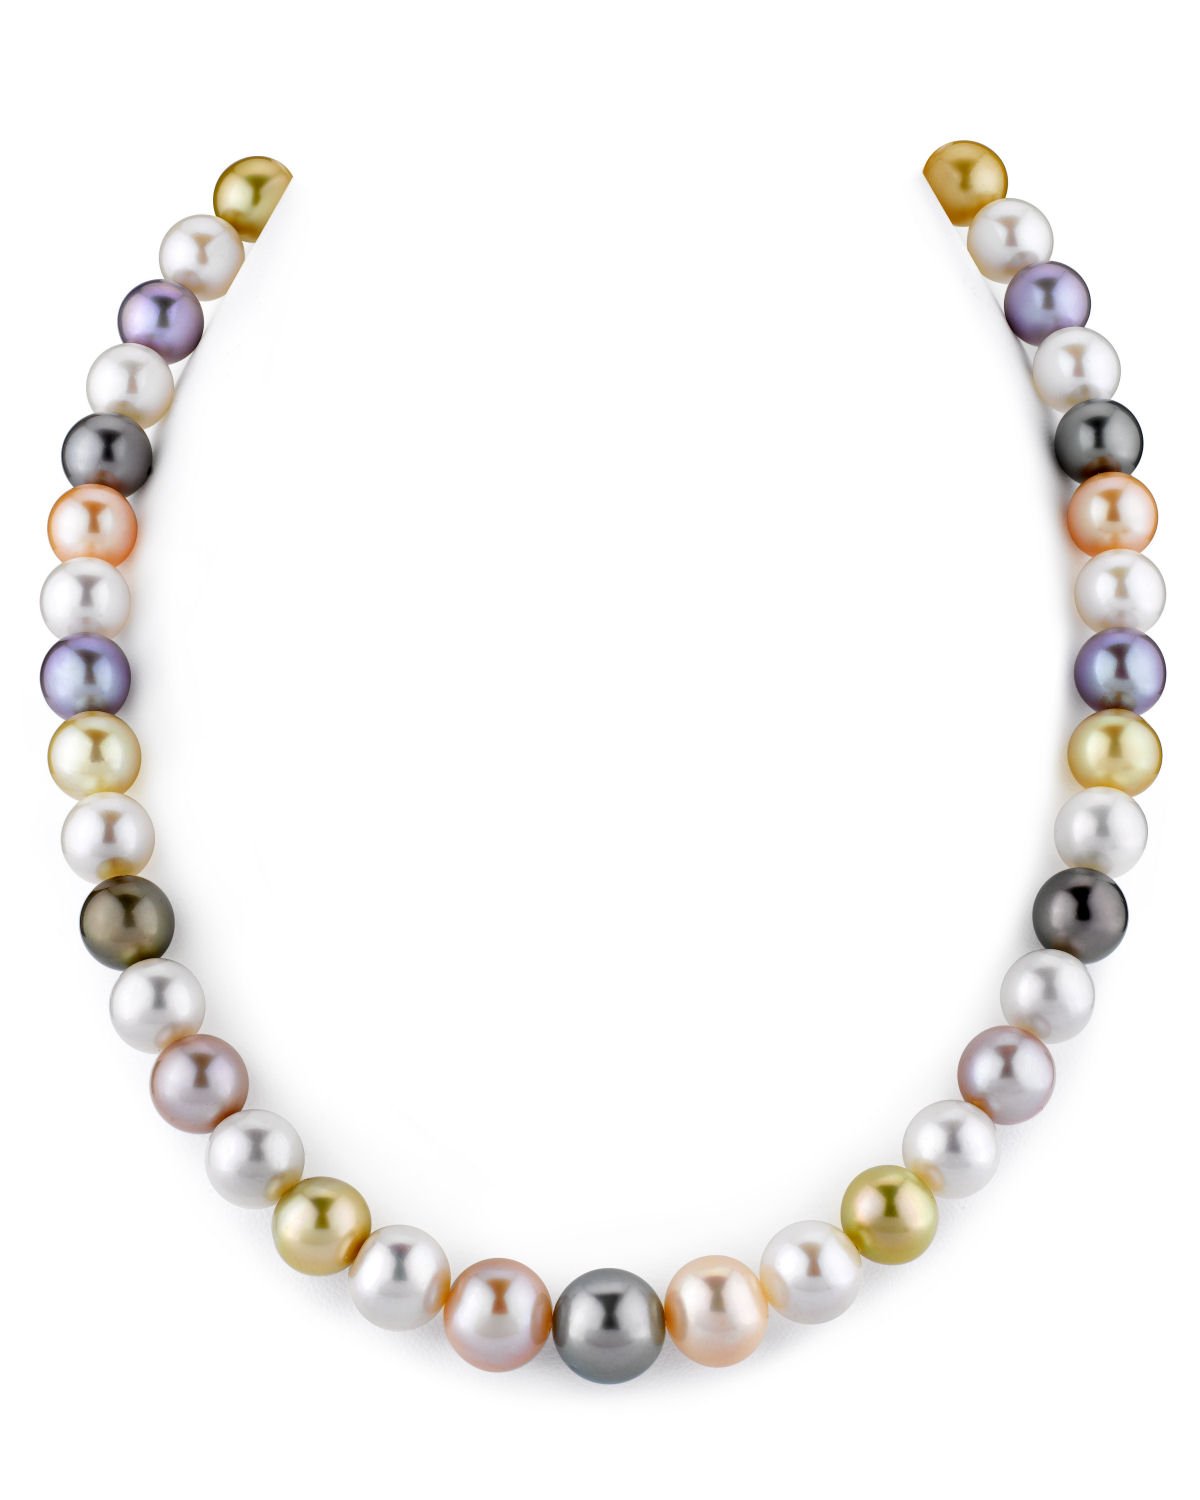 Ornate Jewels' Silver Pearl Necklace